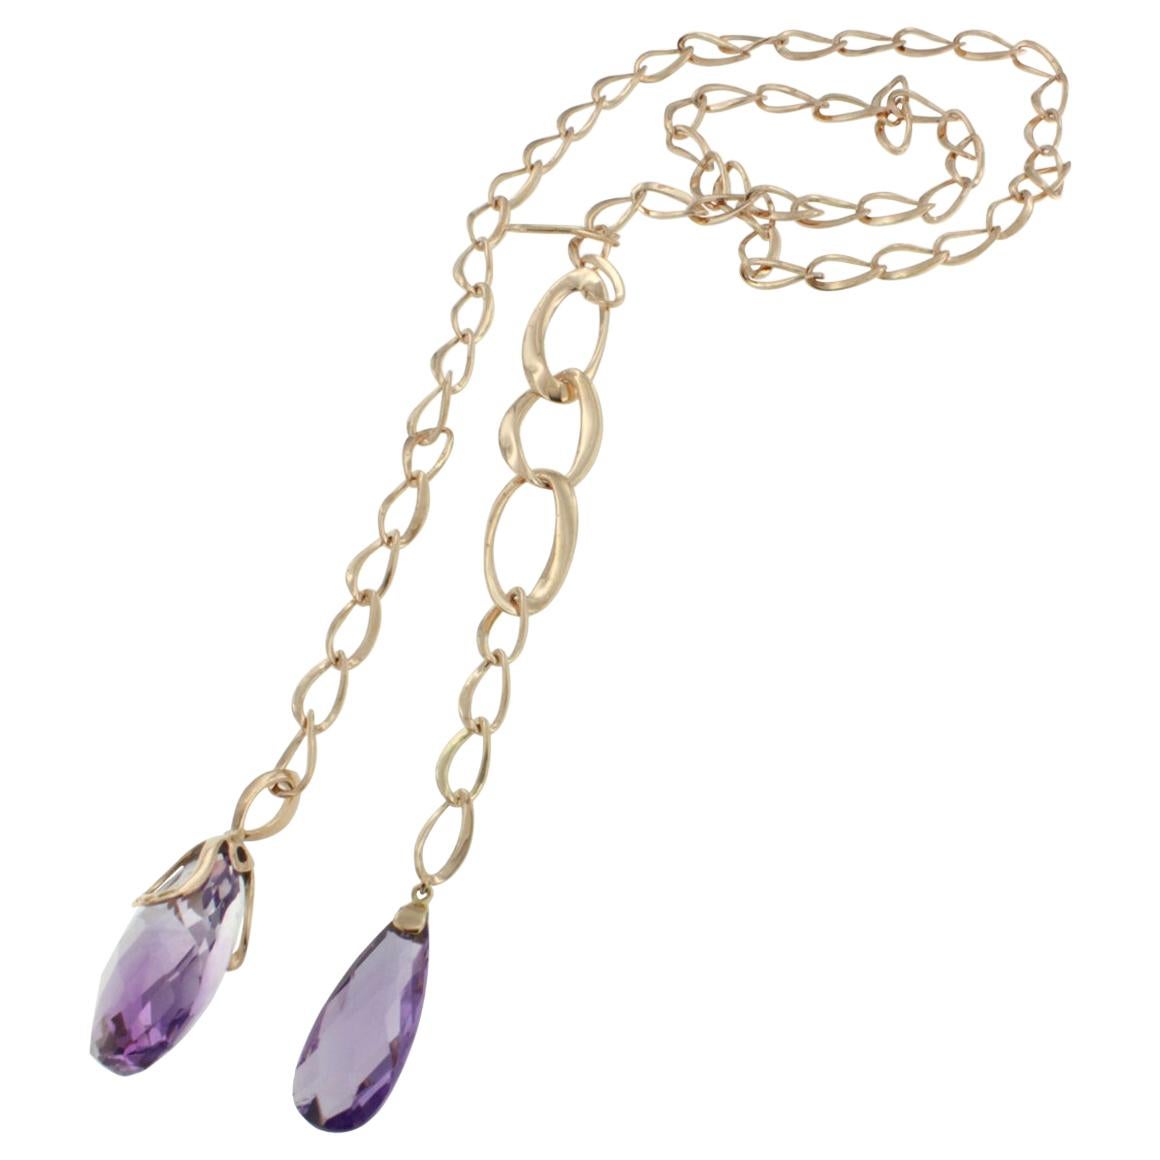 14 Karat Rose Gold with Amethyst Long Necklace